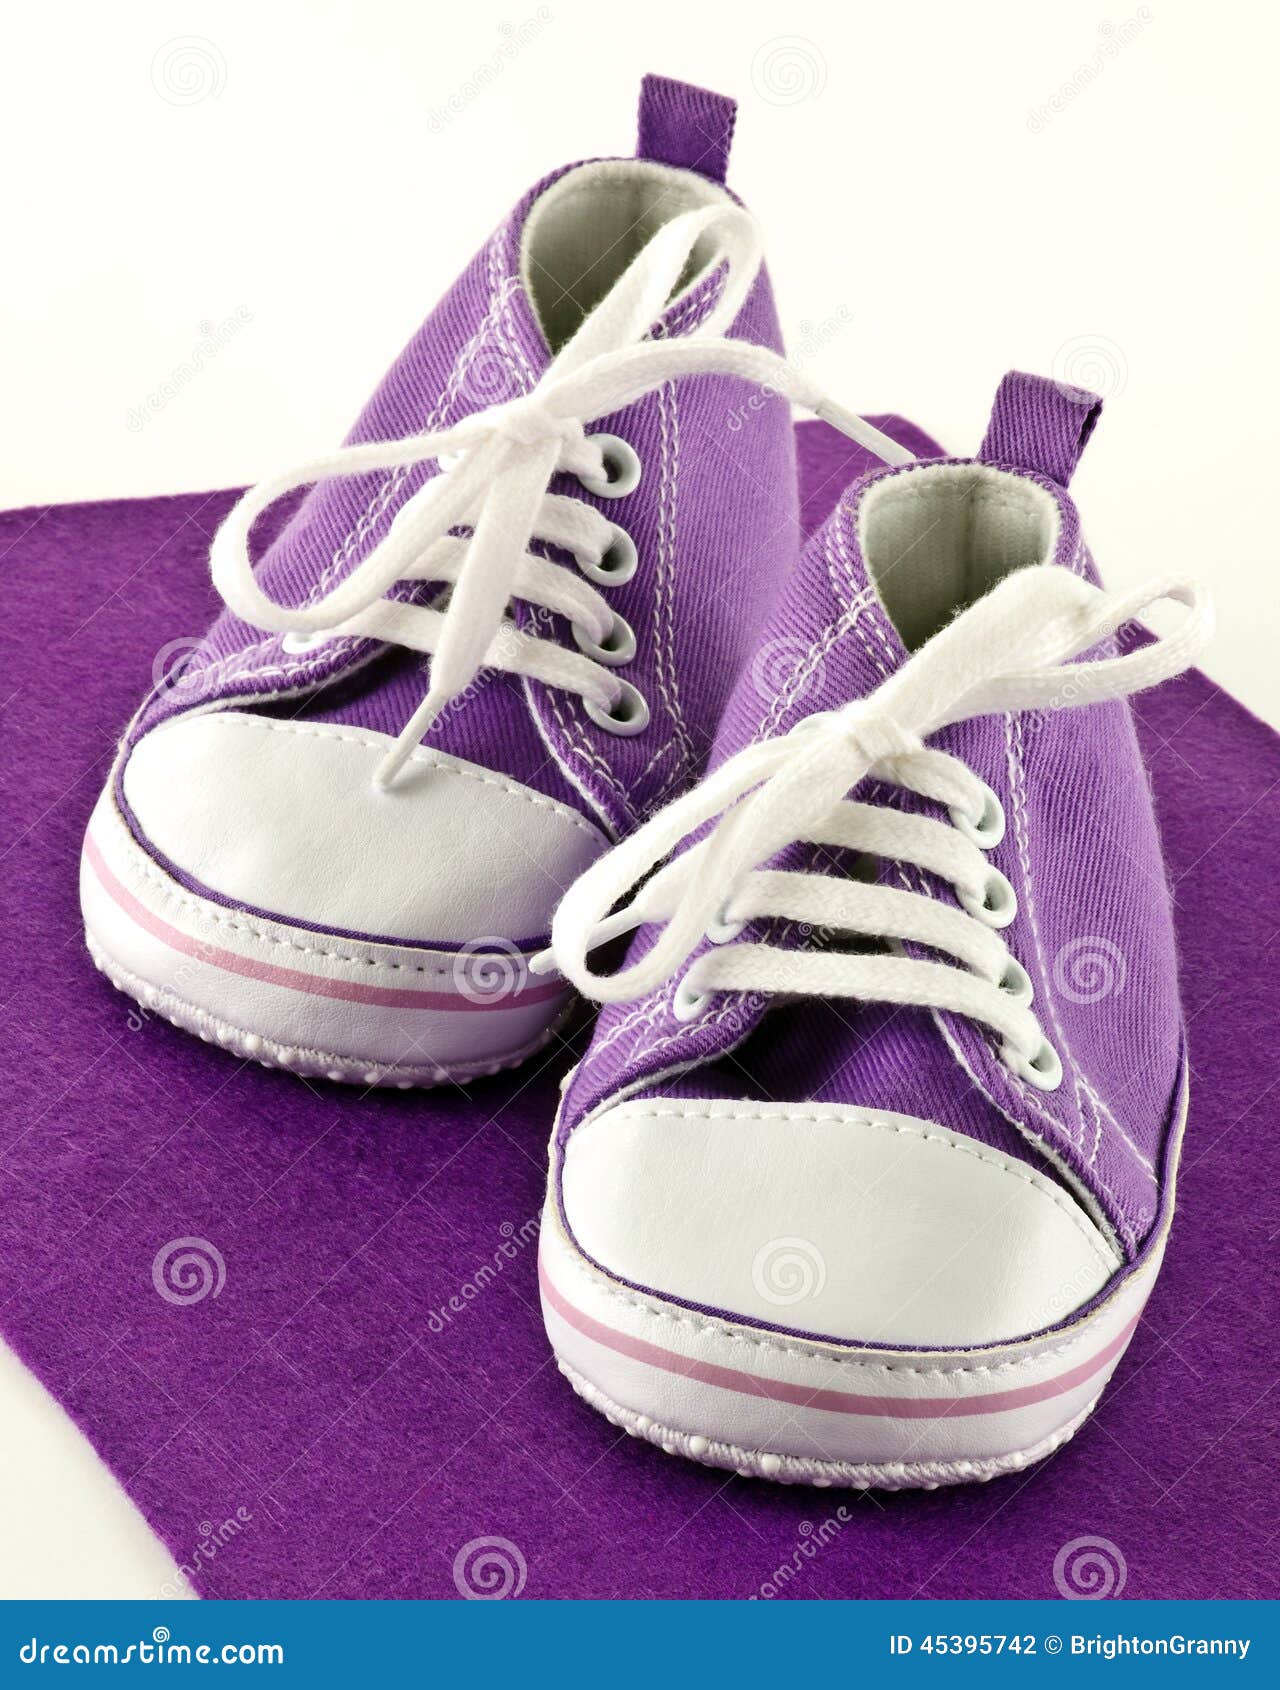 Baby sneakers stock photo. Image of fashion, babies, canvas - 45395742